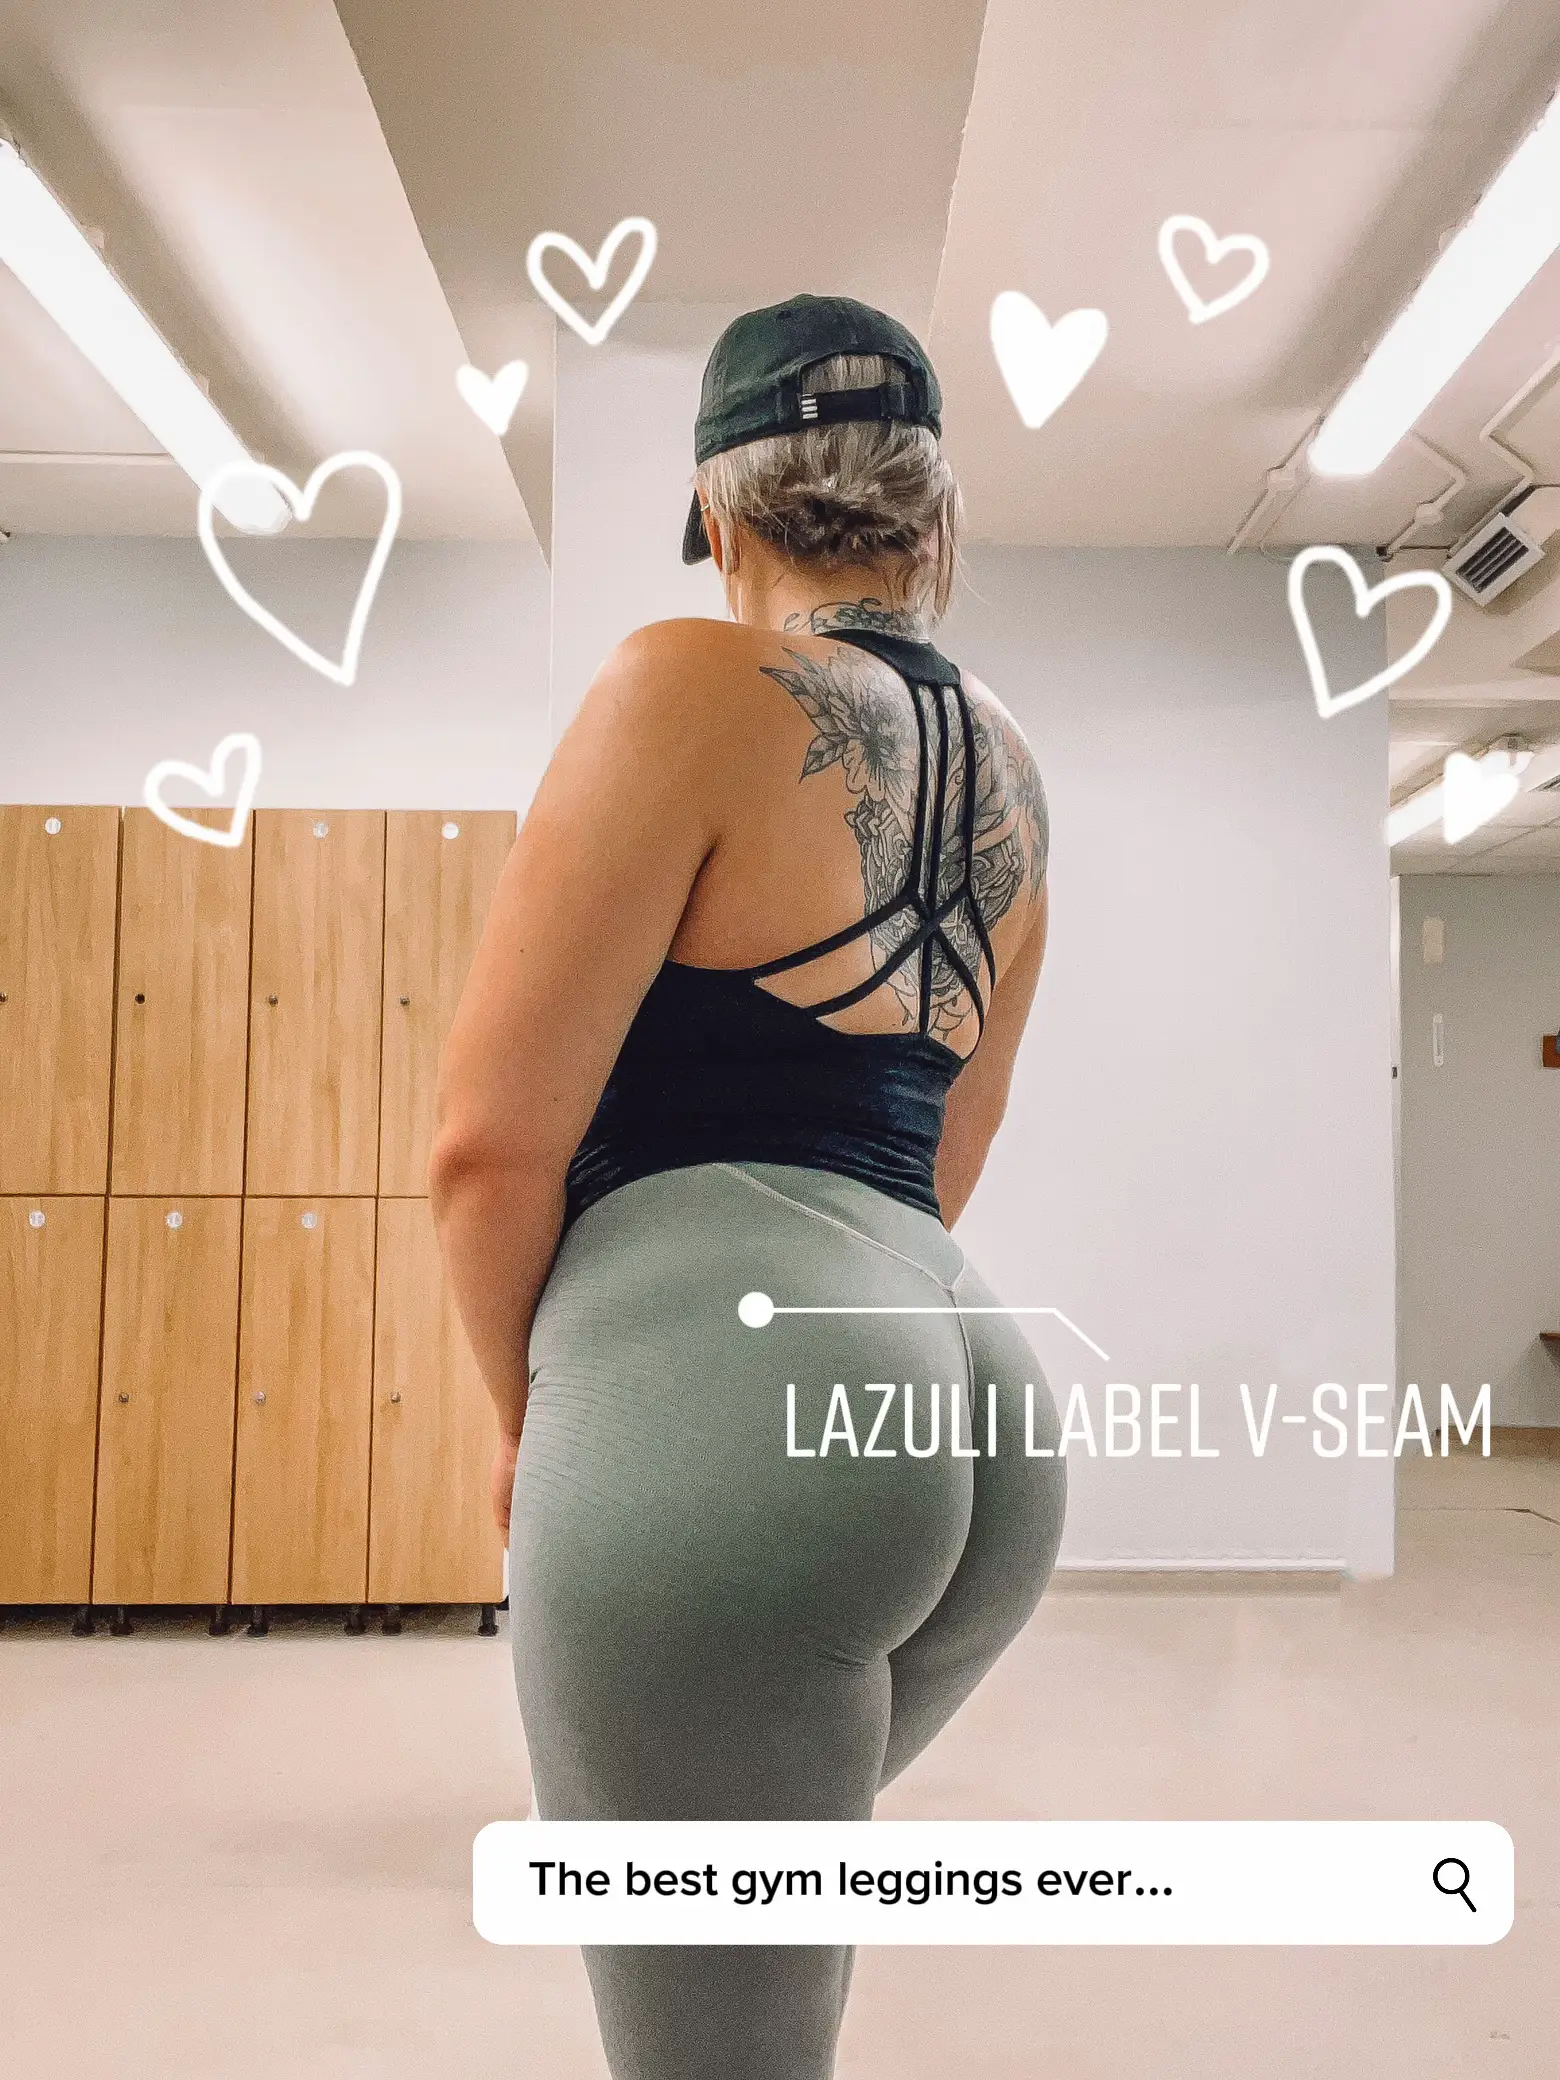 THE best gym leggings 🤍✨, Gallery posted by Itsthatgirljade